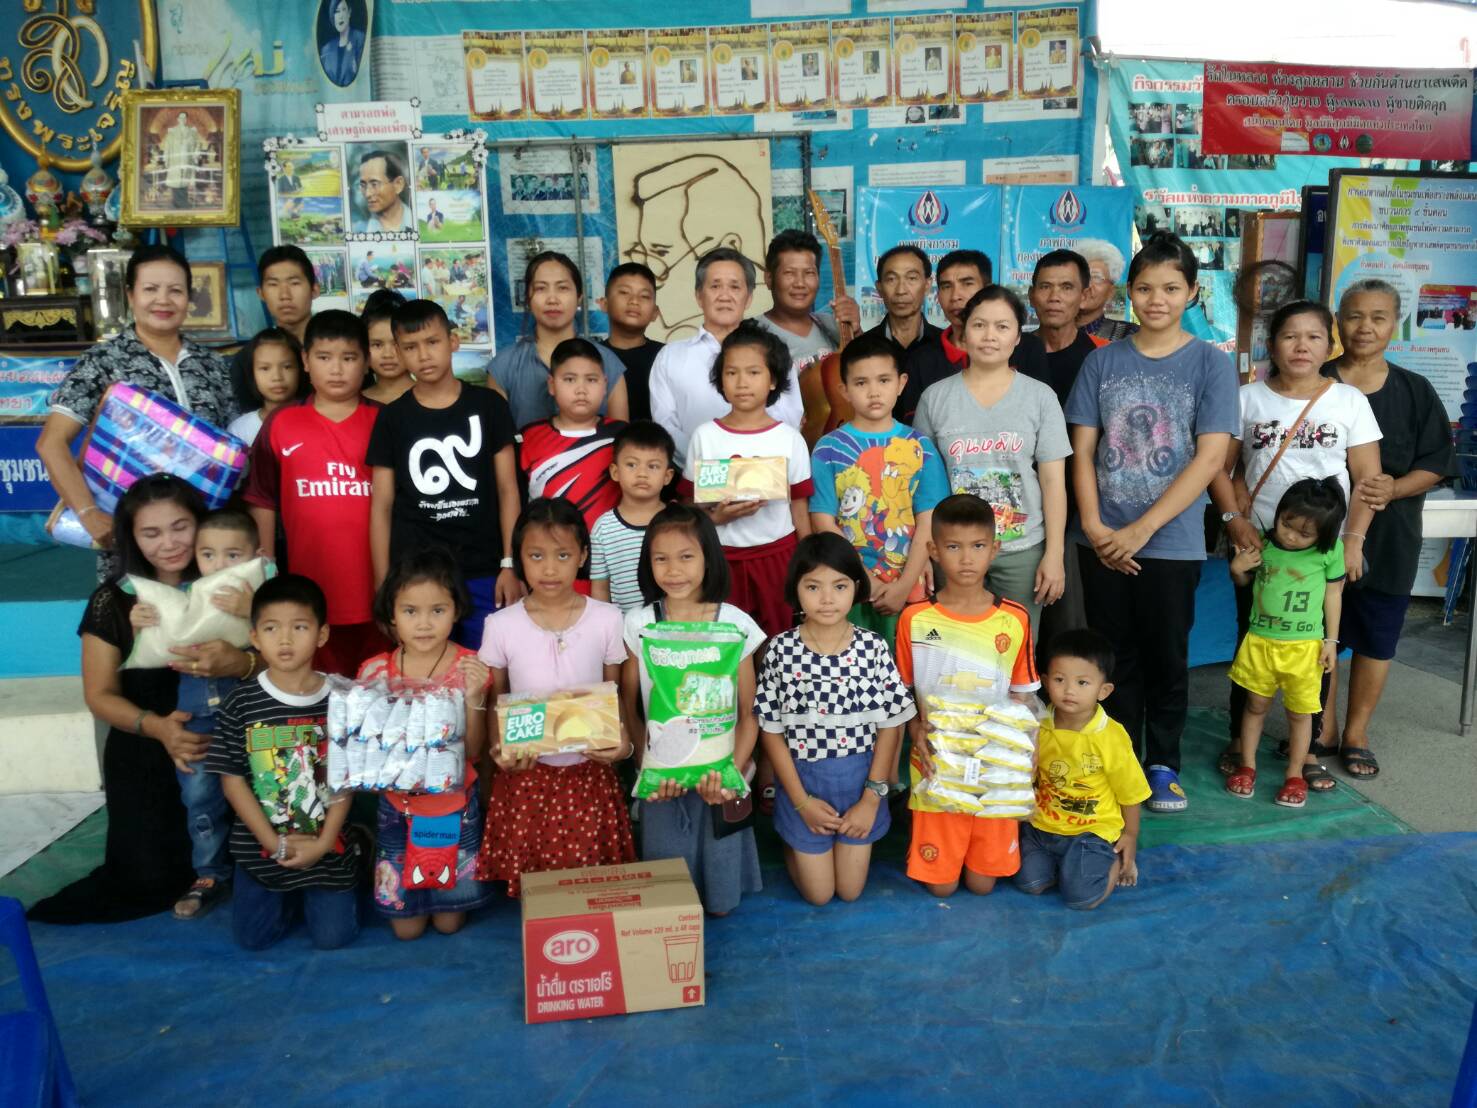 The Christian Club of Pattaya has begun teaching English to youths from the Soi Kophai Community every Saturday.